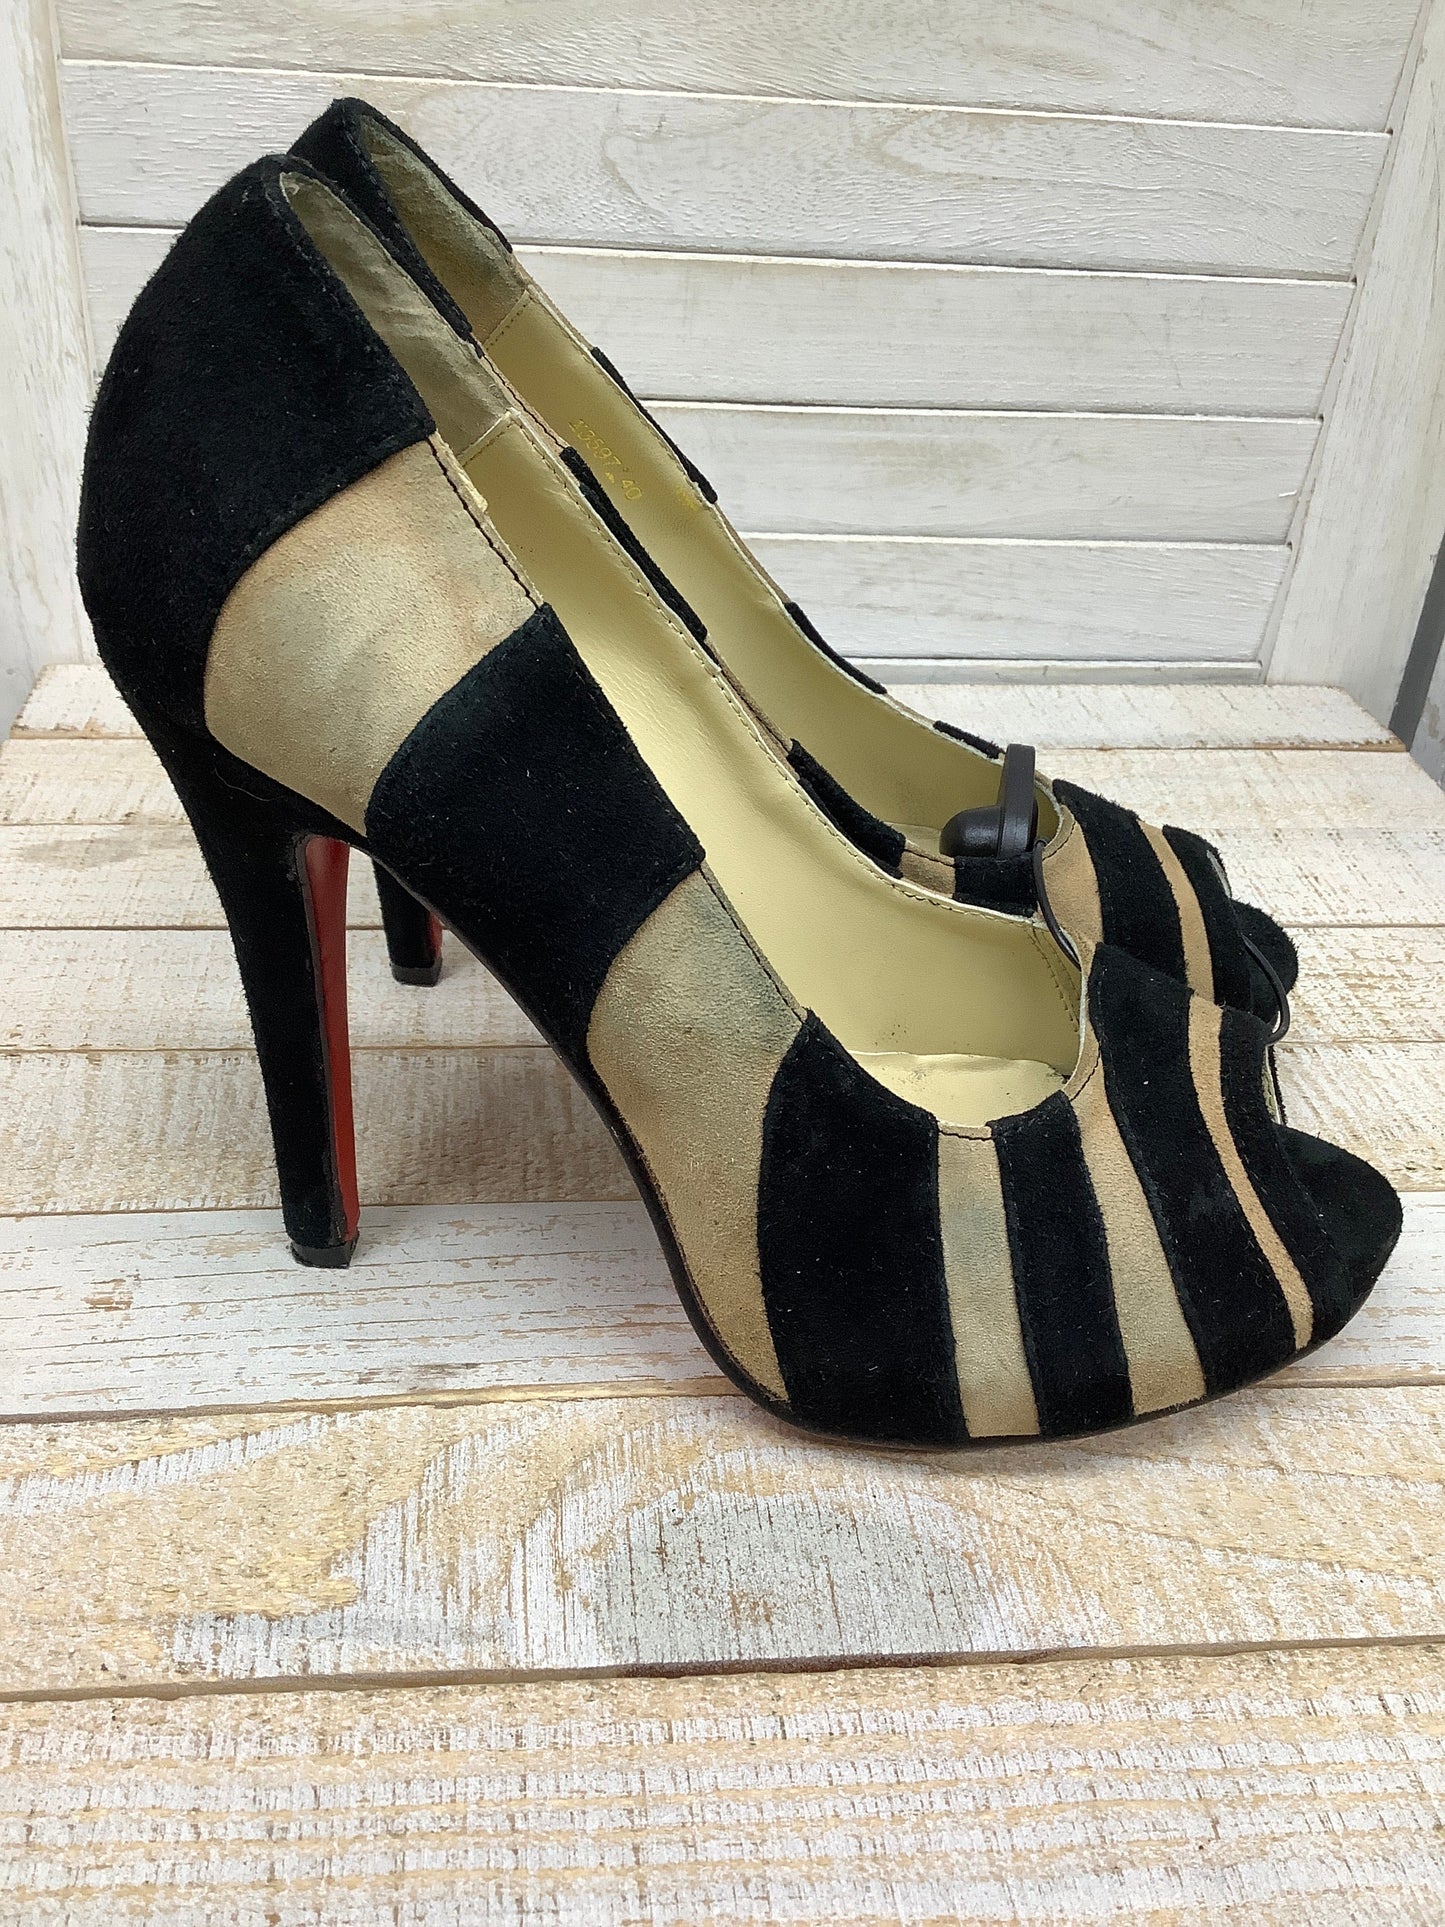 Shoes Heels Platform By Christian Louboutin  Size: 10